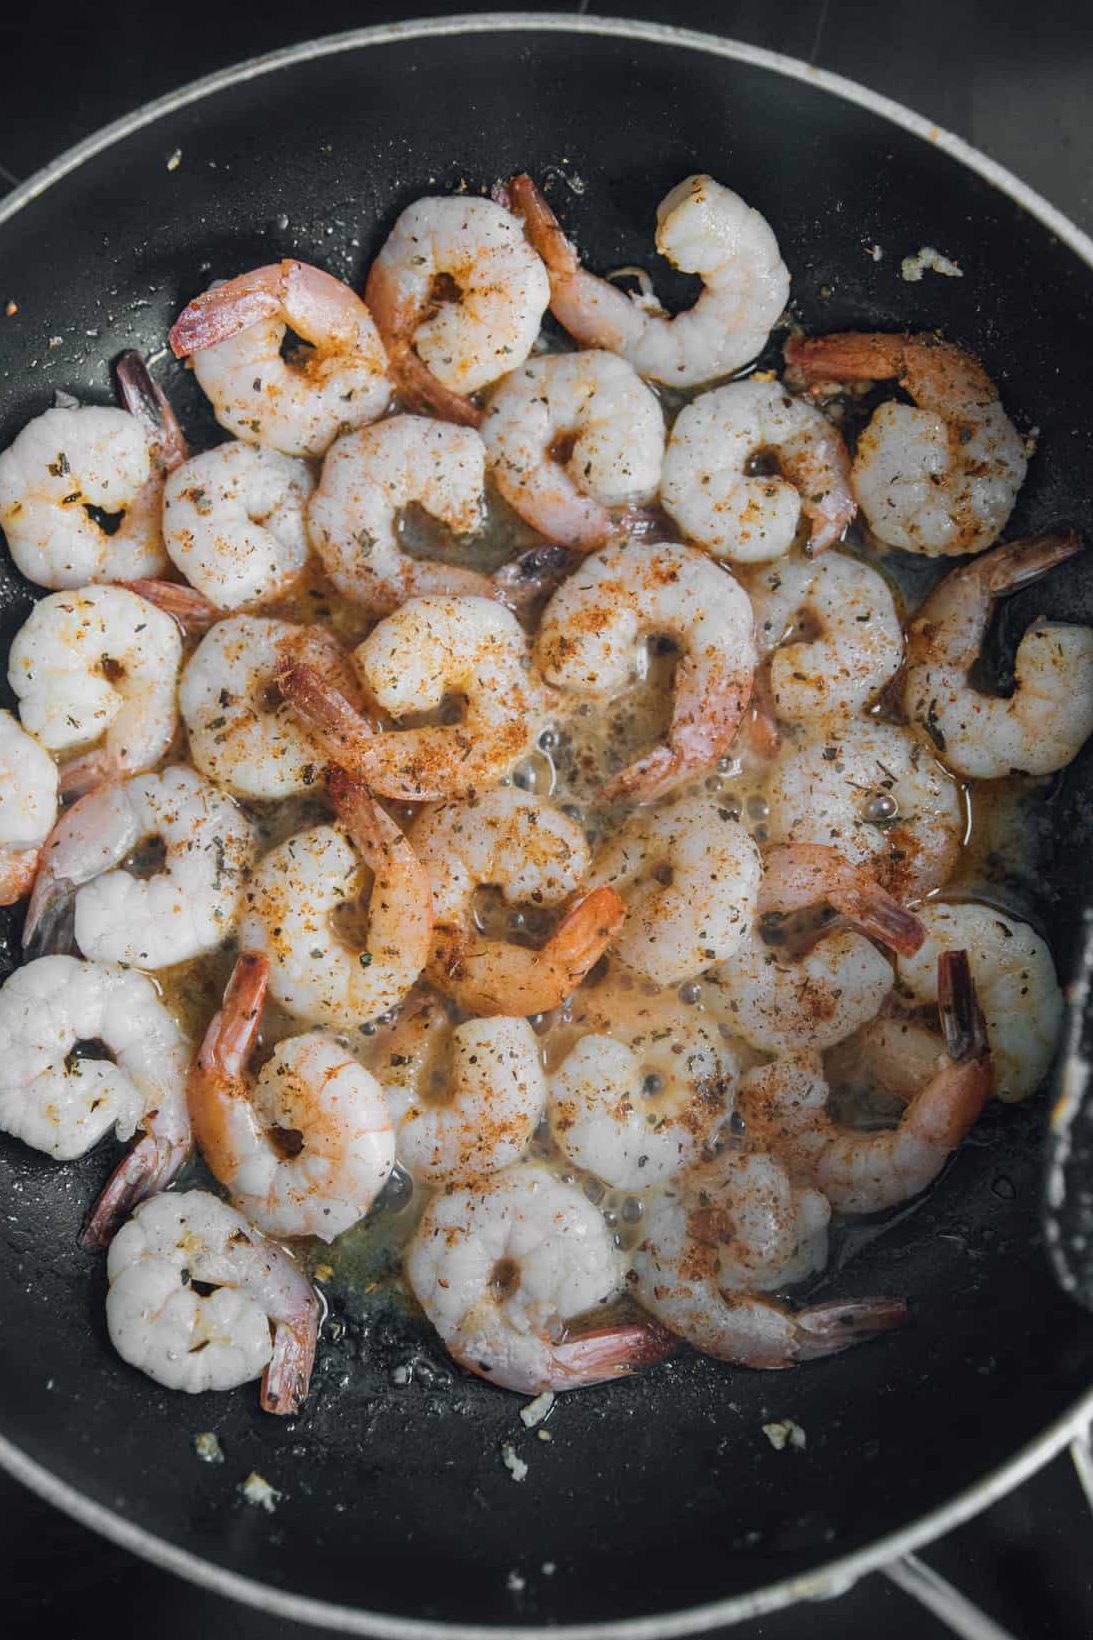 season the shrimps with the Cajun seasoning., be generous (to your liking)!